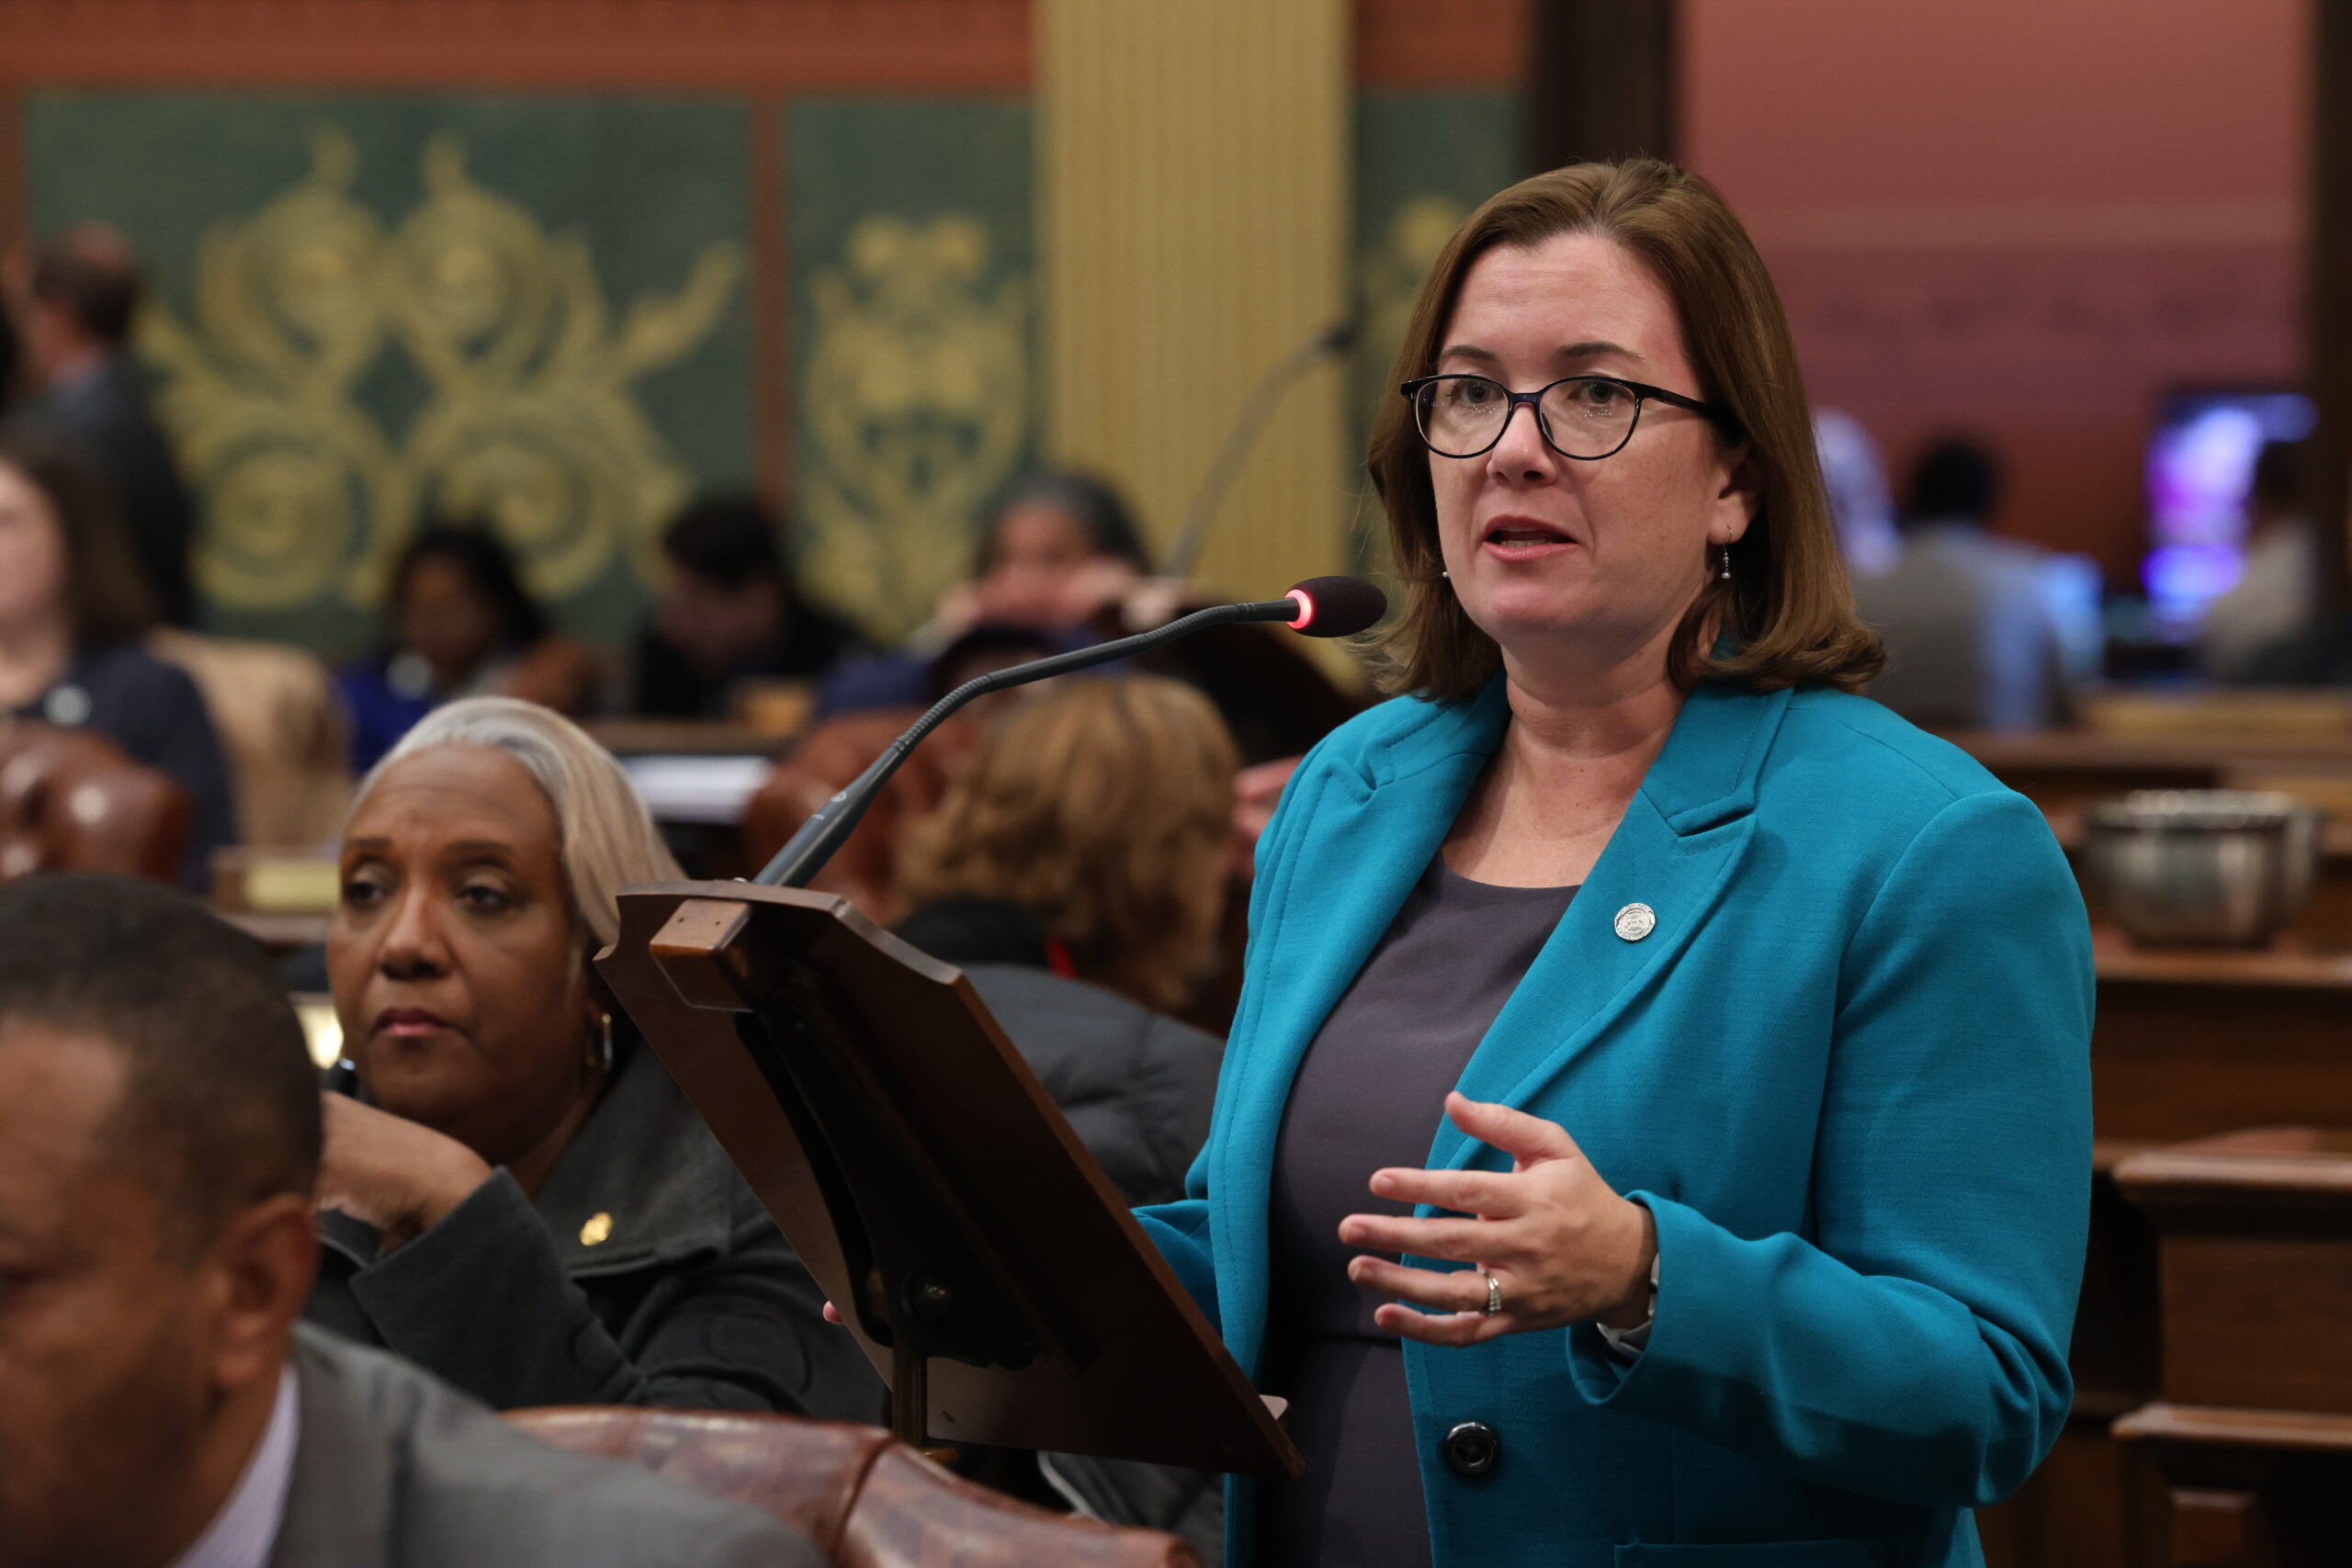 Rep. Natalie Price addresses the Michigan House from a podium on the floor.